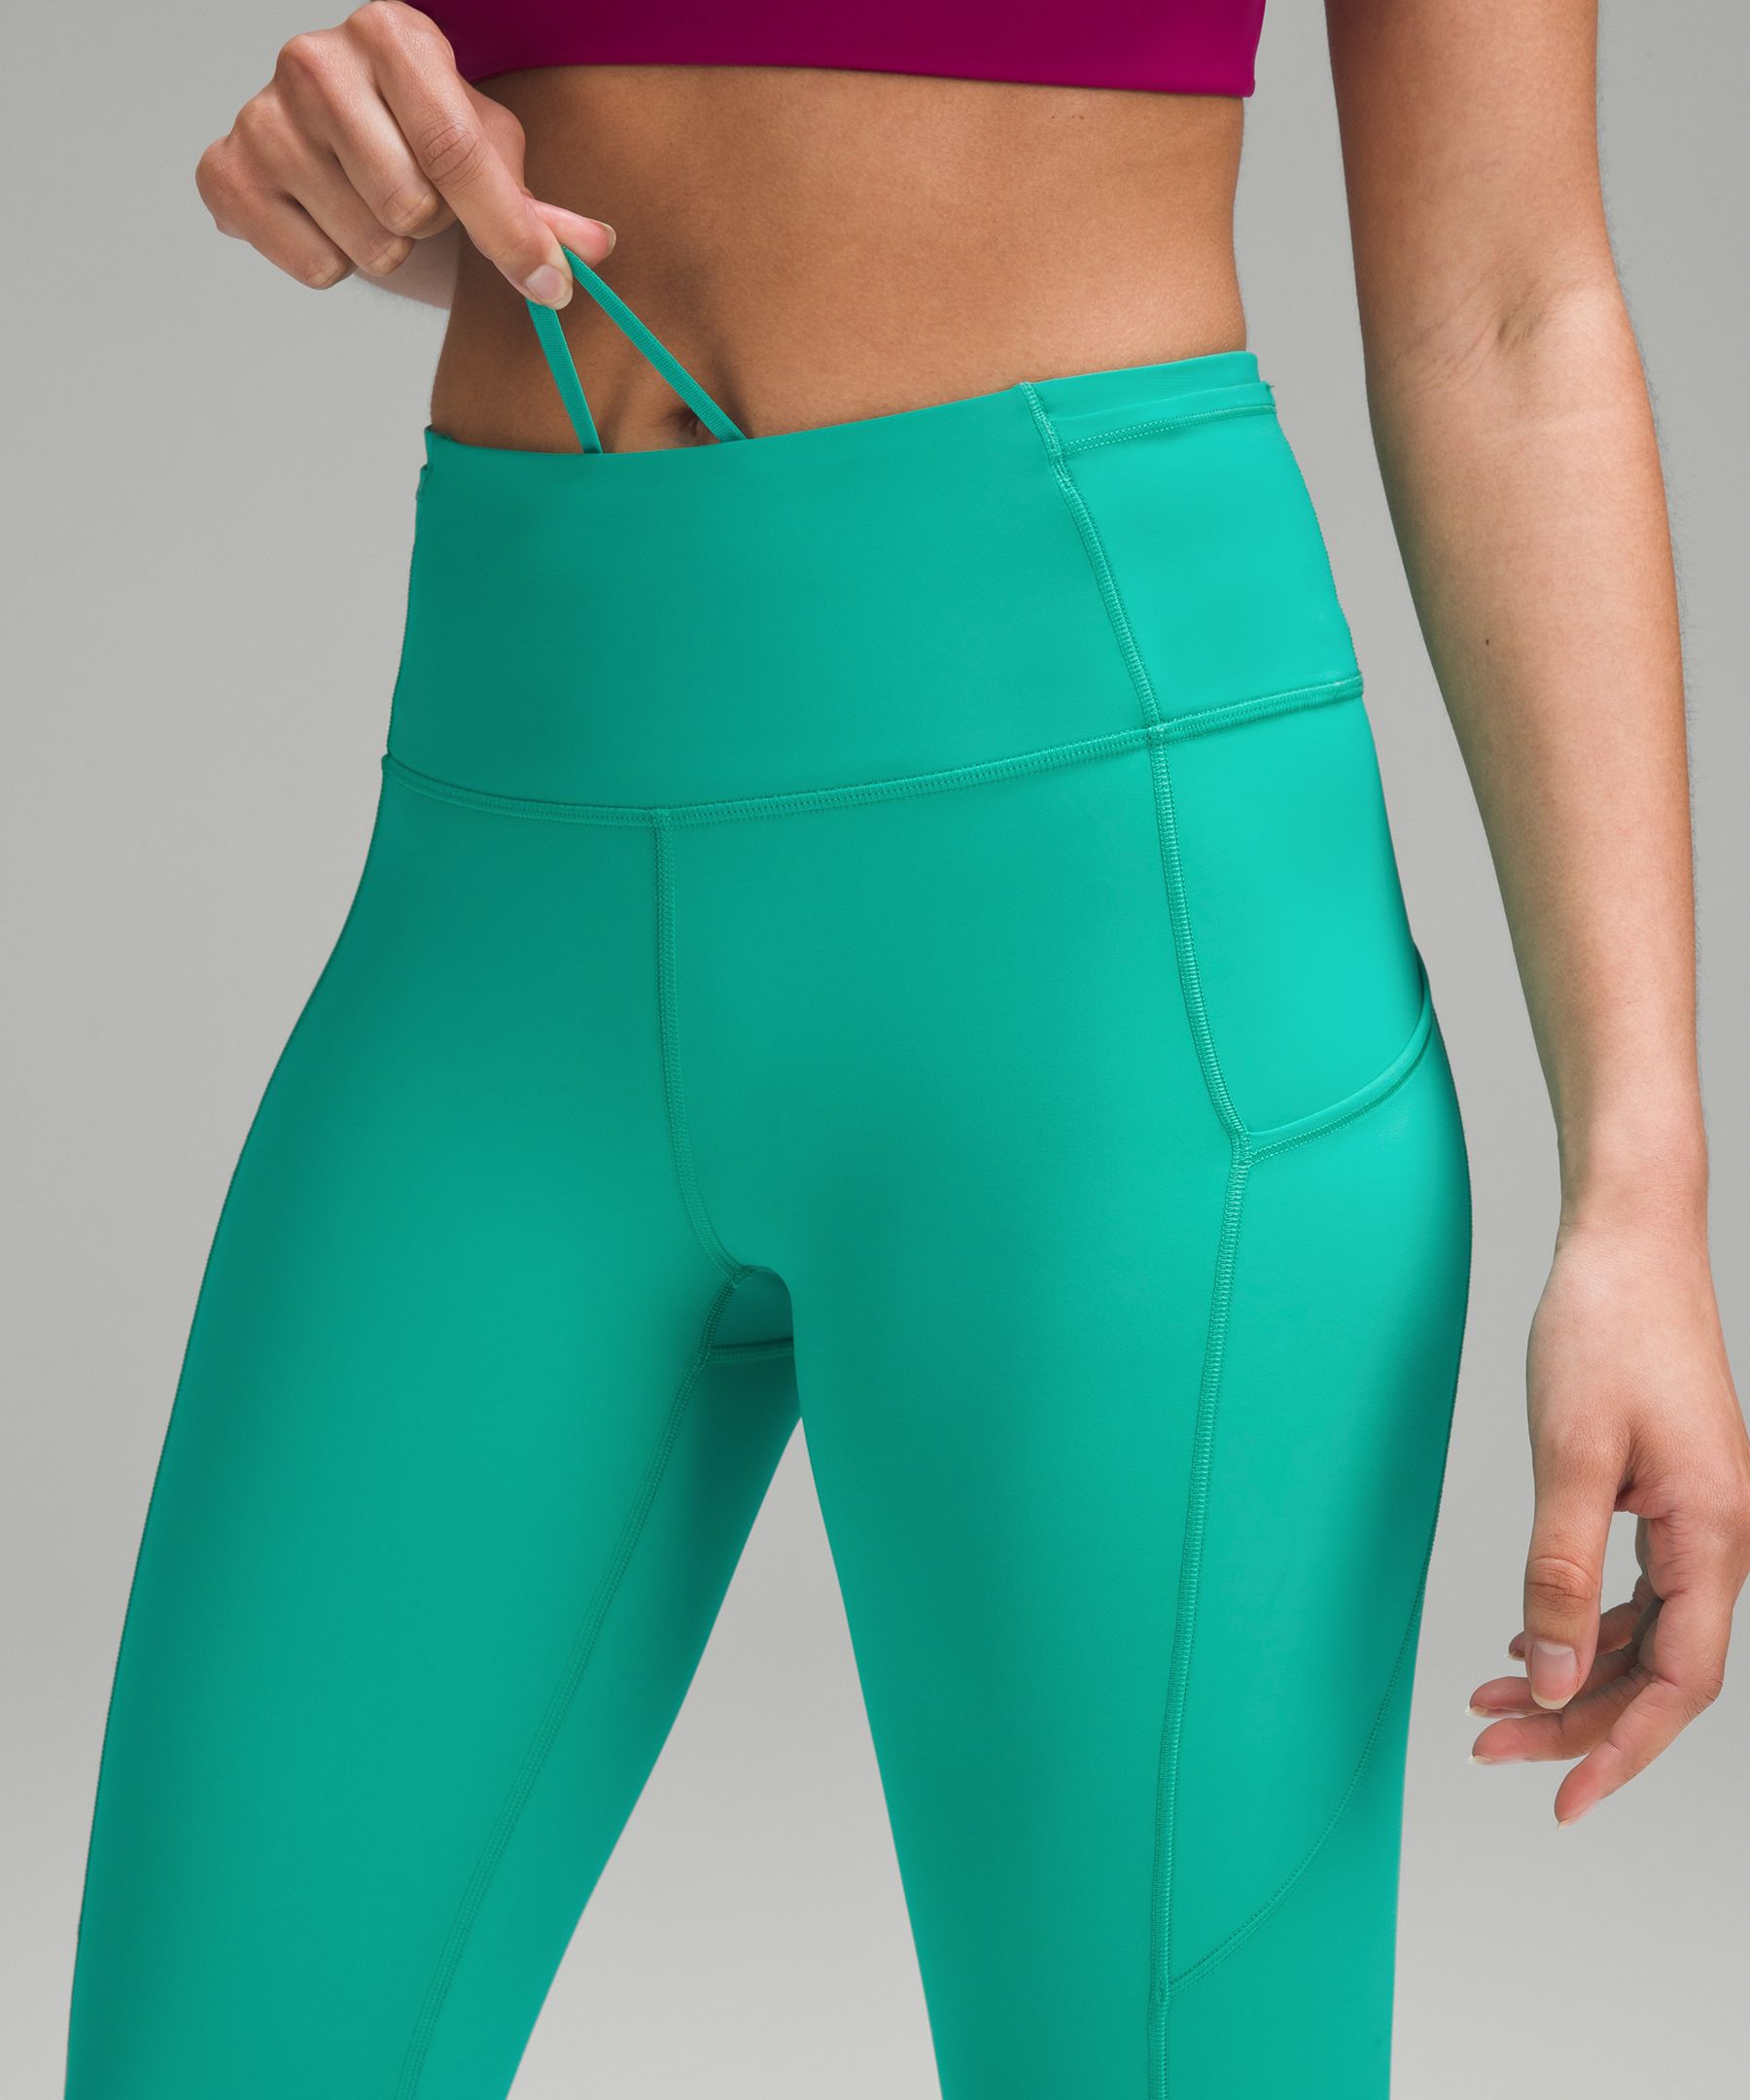 Lululemon InStill High-Rise Tight 25 - Size 14 - Ancient Copper - RP £108